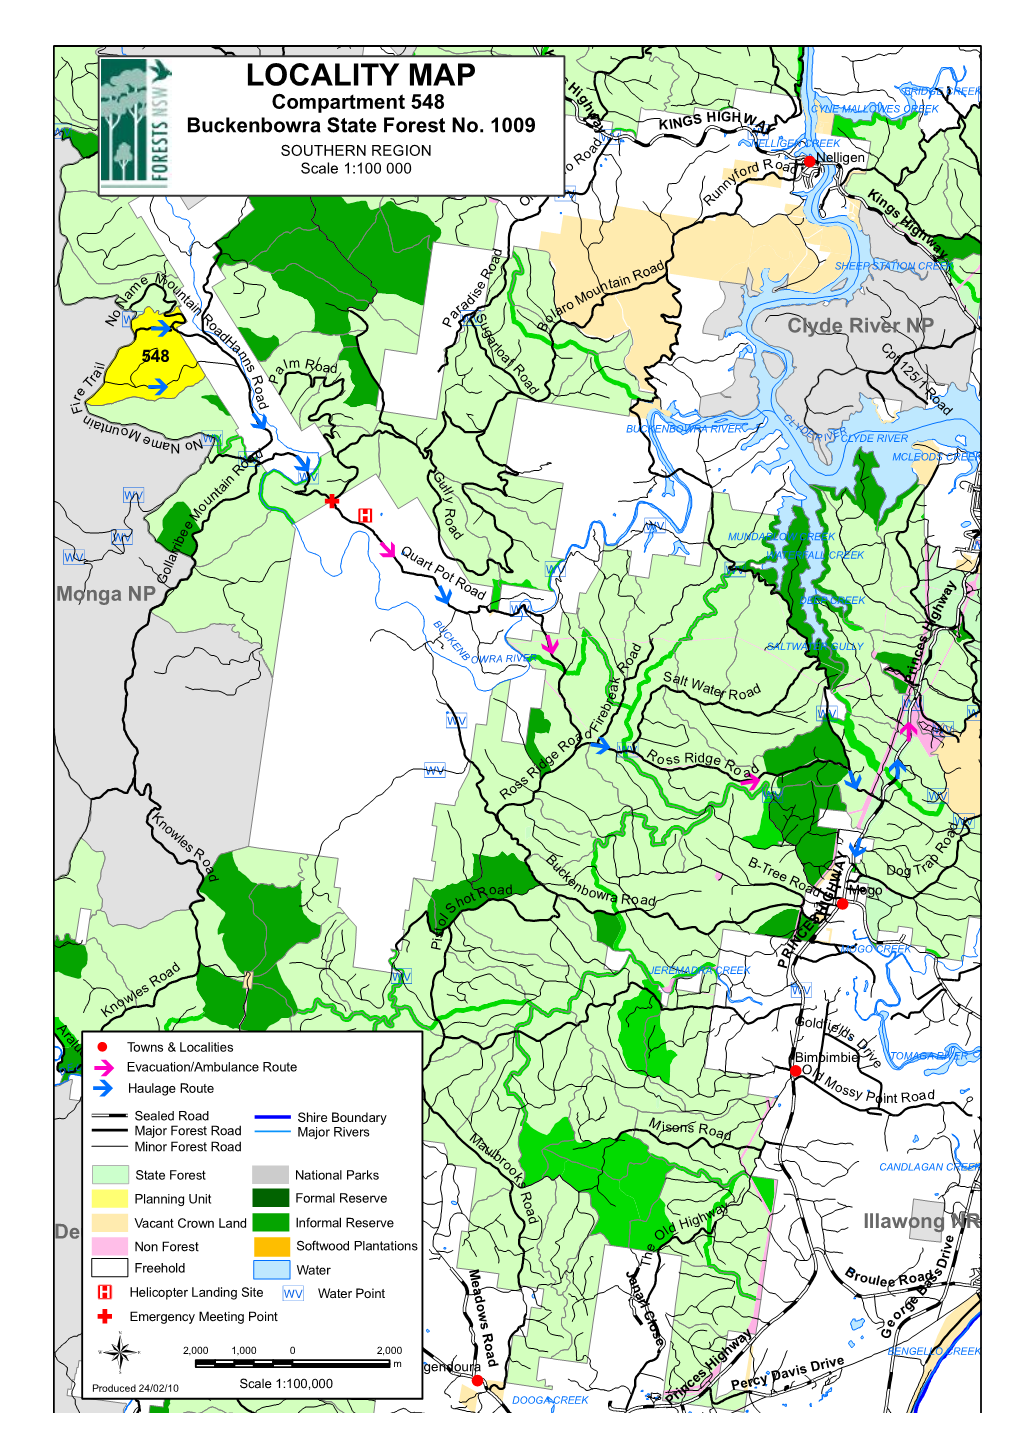 LOCALITY MAP BRIDGE CREEK Compartment 548 CYNE MALLOWES CREEK Buckenbowra State Forest No